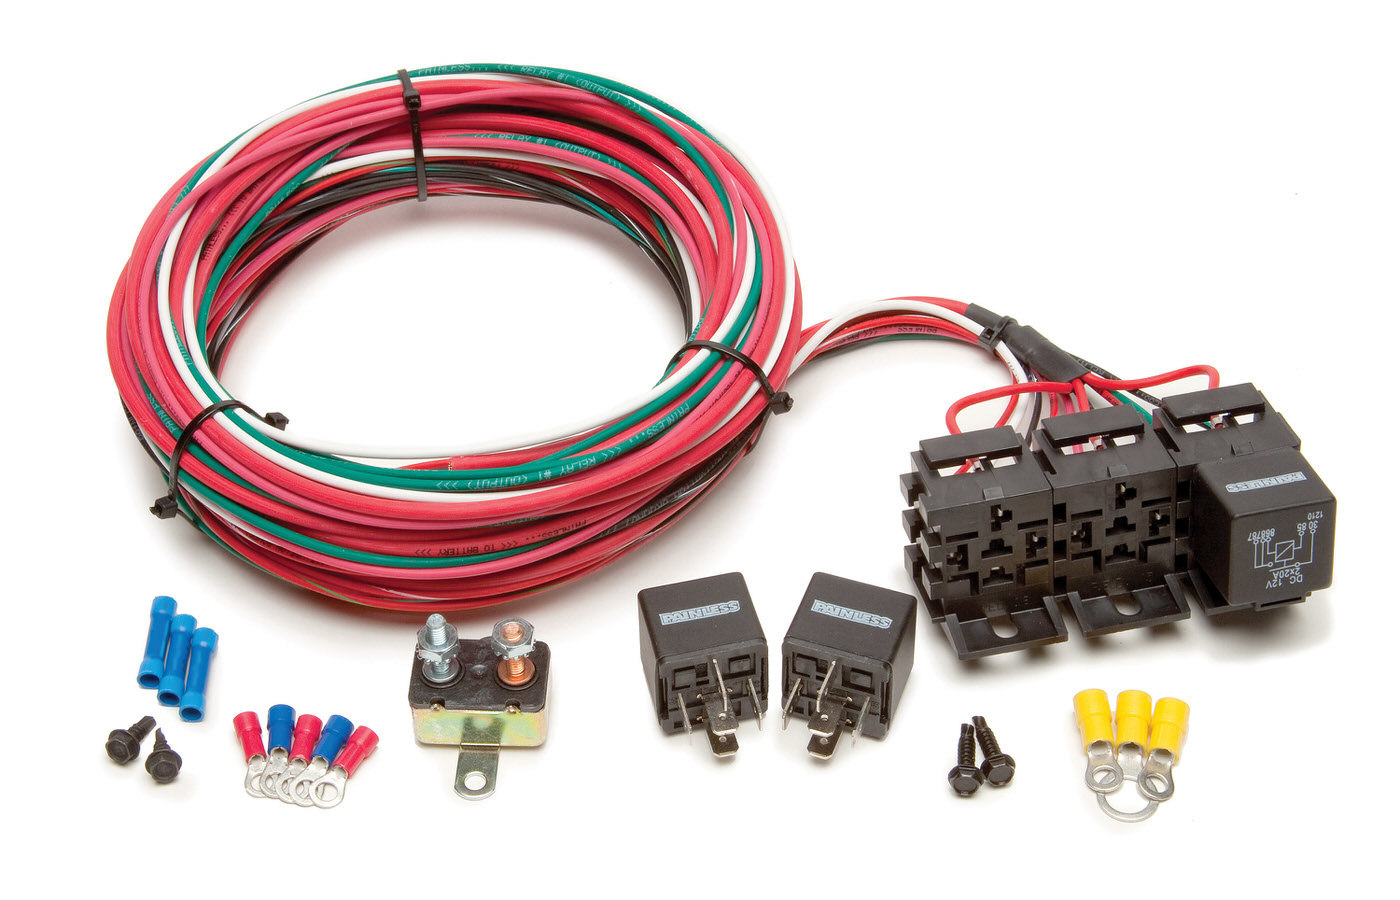 Painless Wiring 30107 Relay Switch, 3 Bank, Single Pole, 40 amp, 12V, Wiring Pigtail Included, Universal, Kit